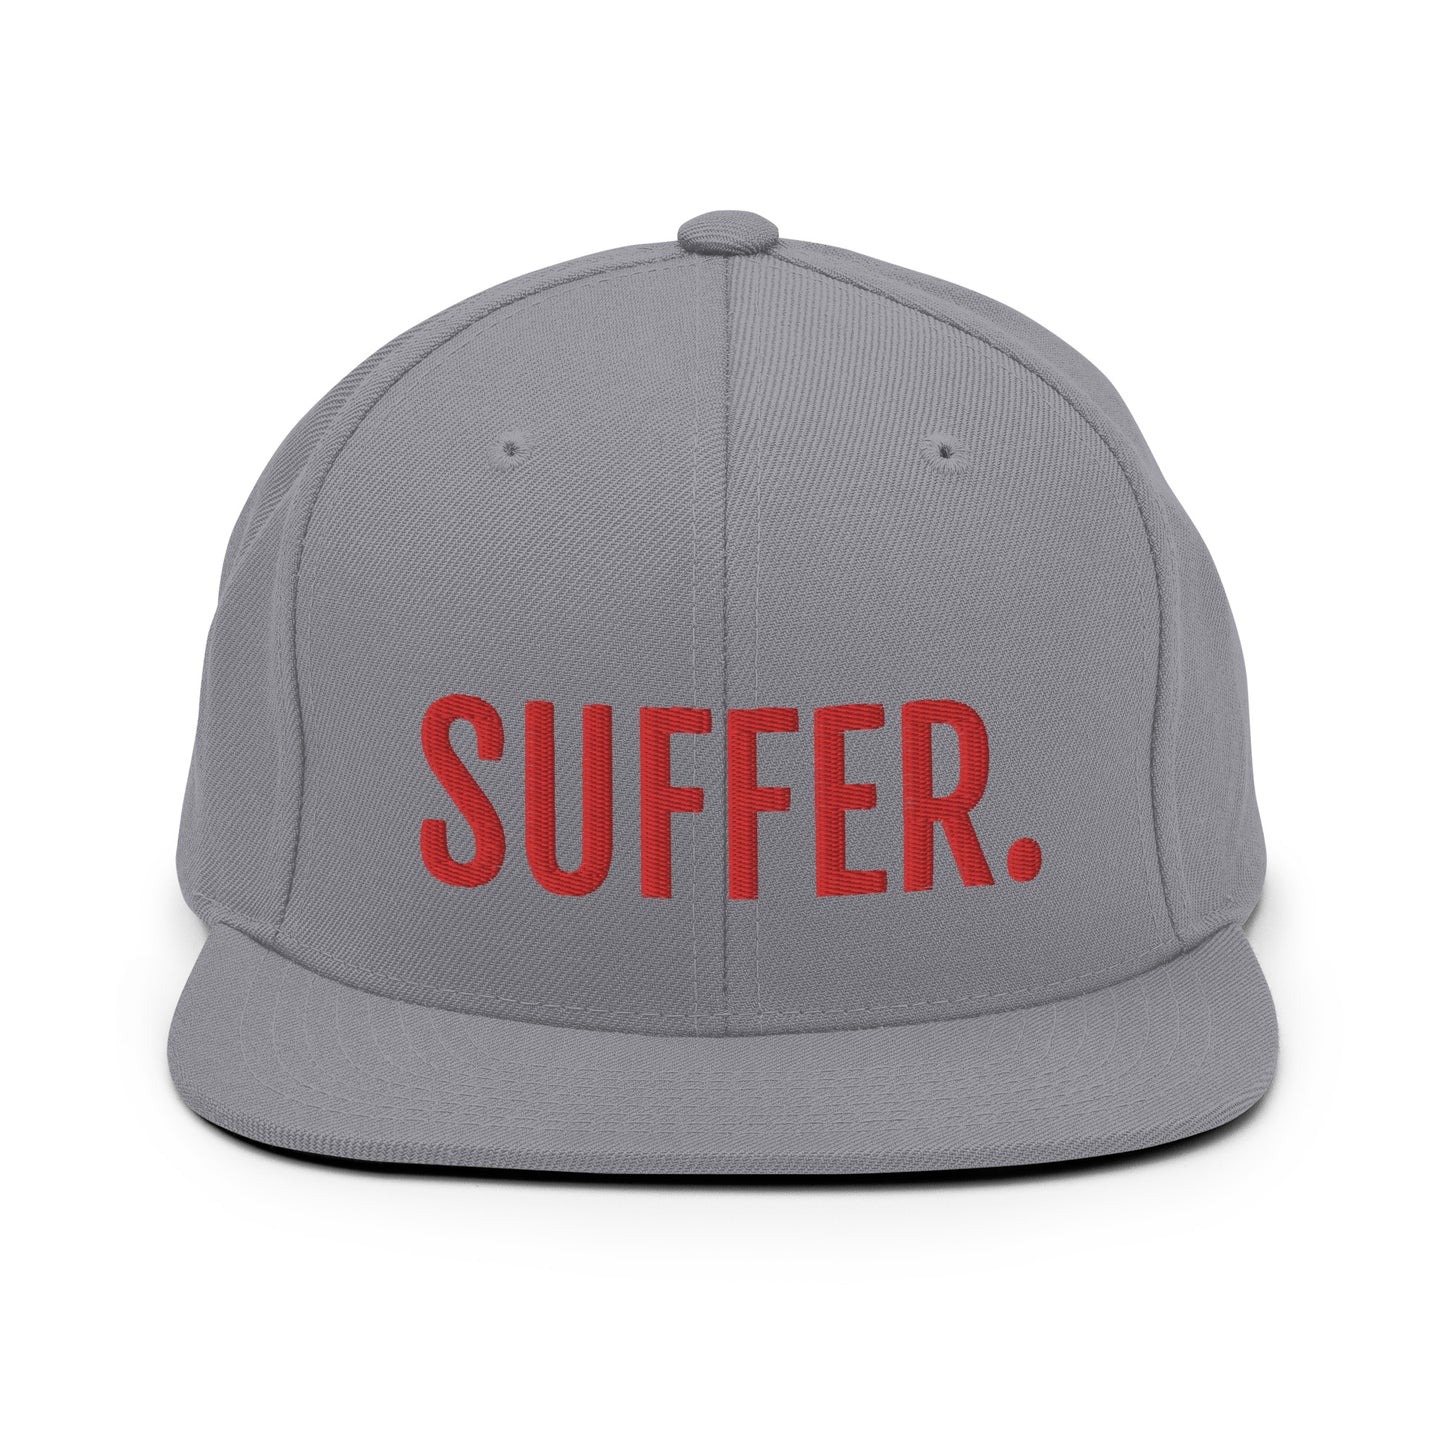 RED SUFFER. Snapback Hat